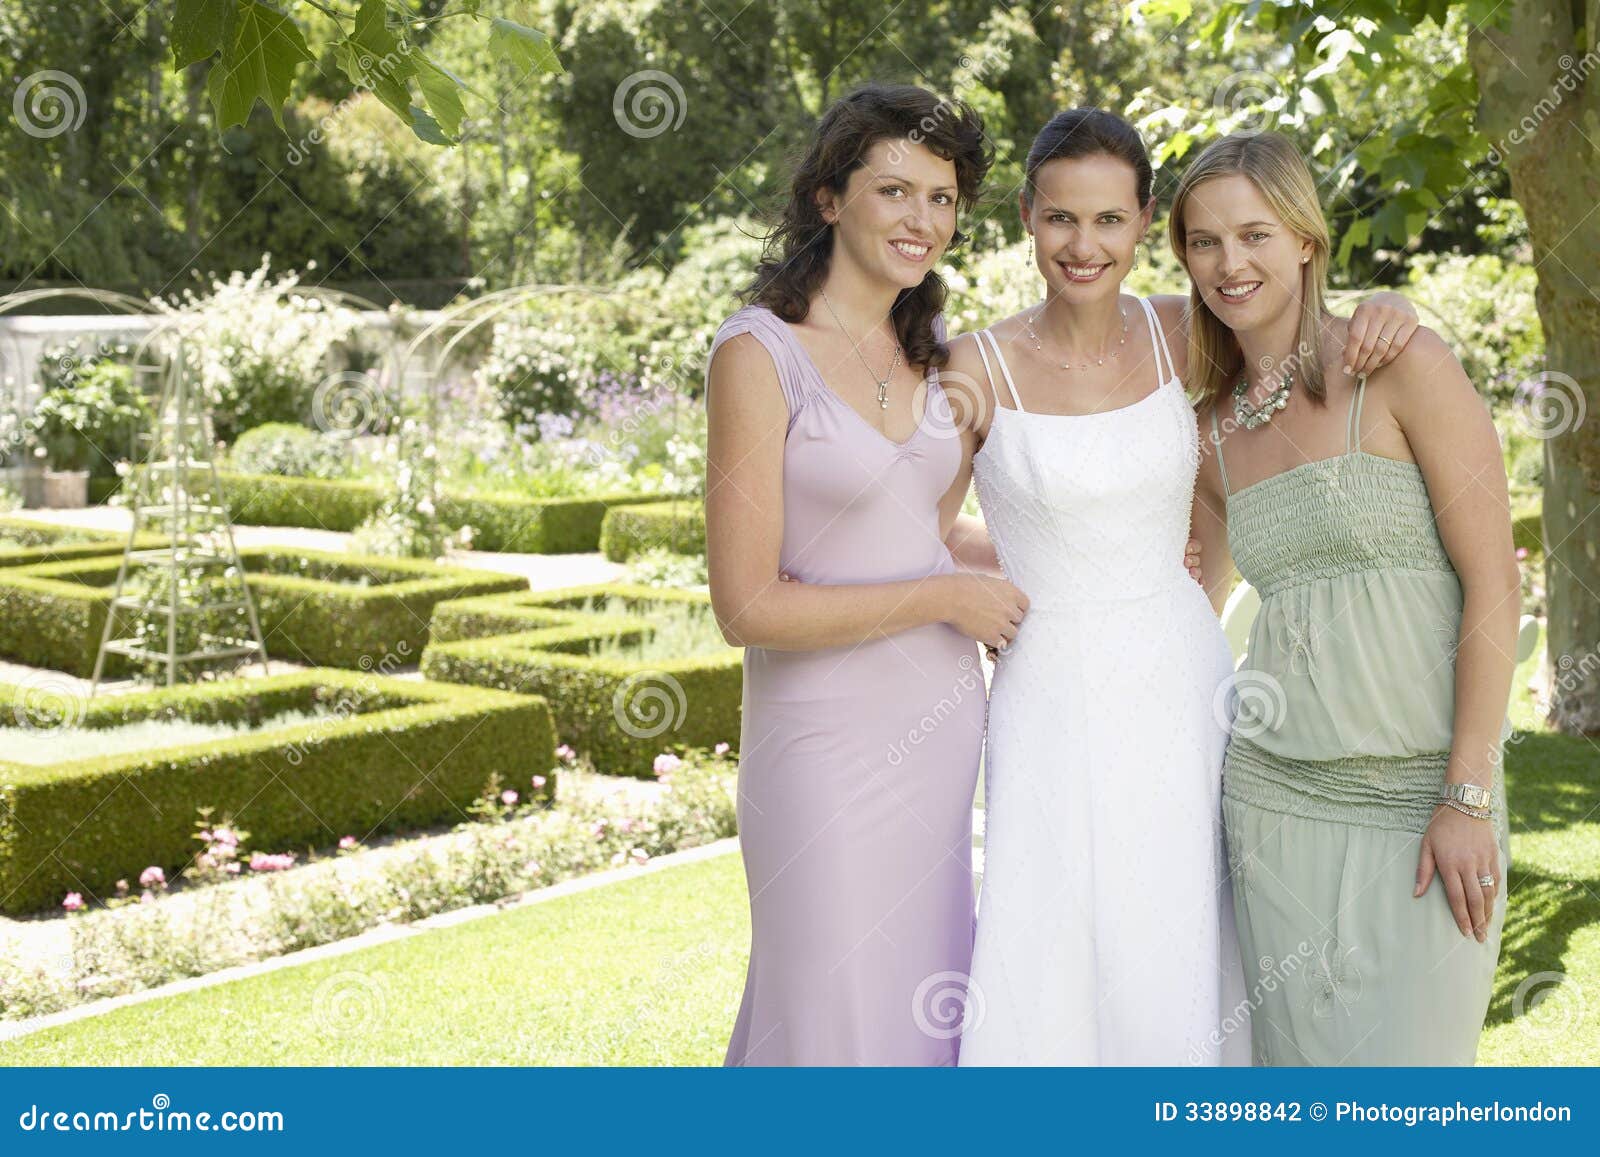 Happy Bride With Friends In Garden Stock Photo Image Of Bride Newlywed